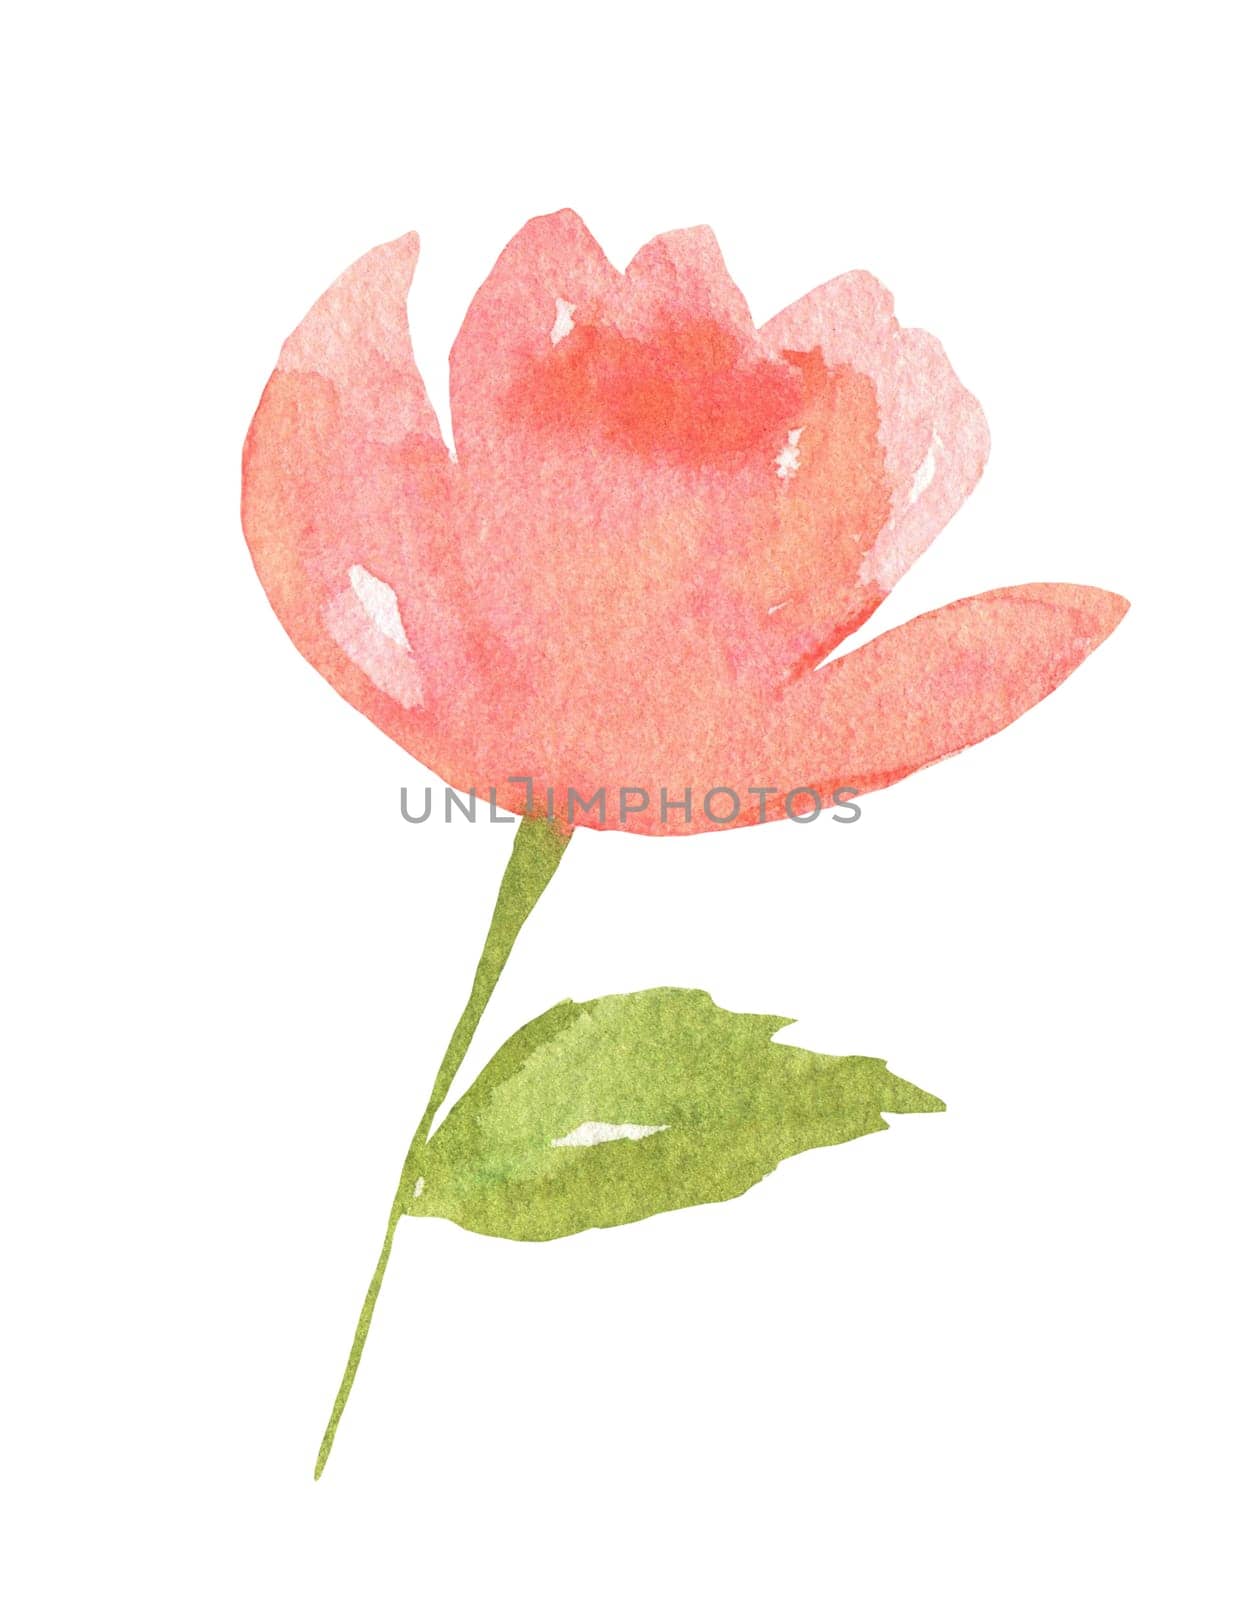 Flower watercolor illustration isolated on white. Pink rose by ElenaPlatova